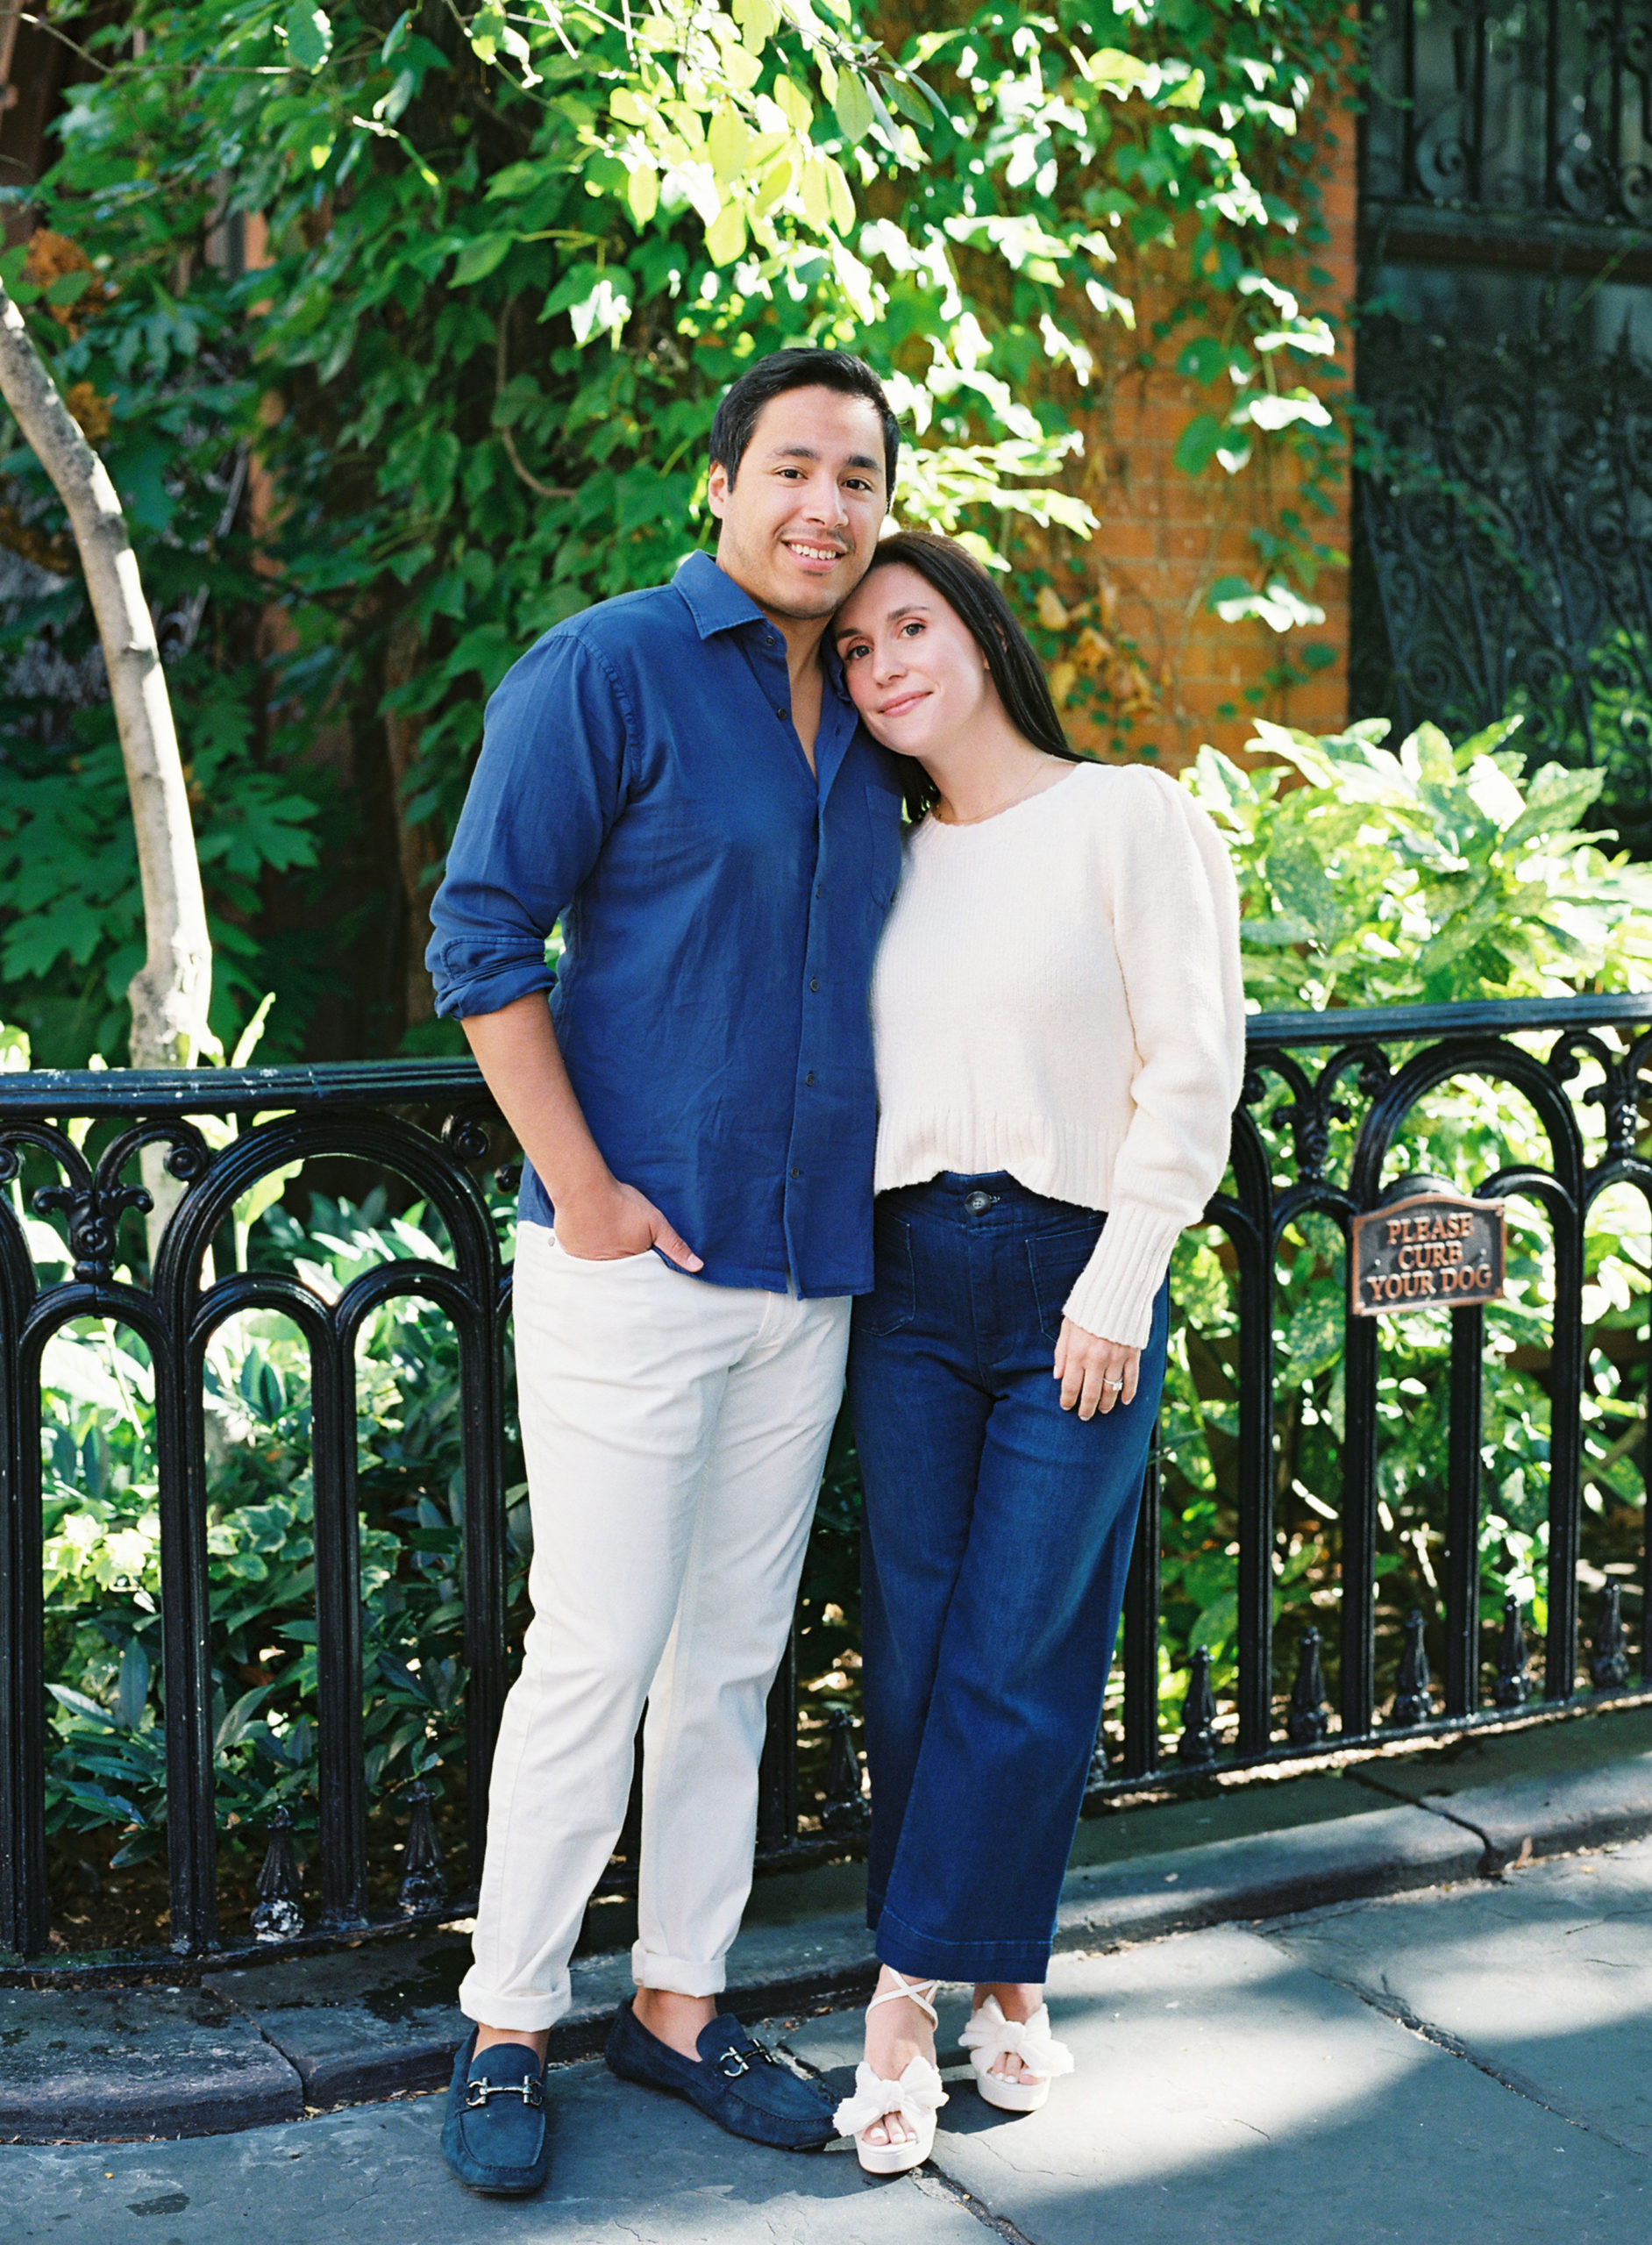 Gramercy Park Engagement Session, New York Engagement Photographer, Anna Gianfrate Photography